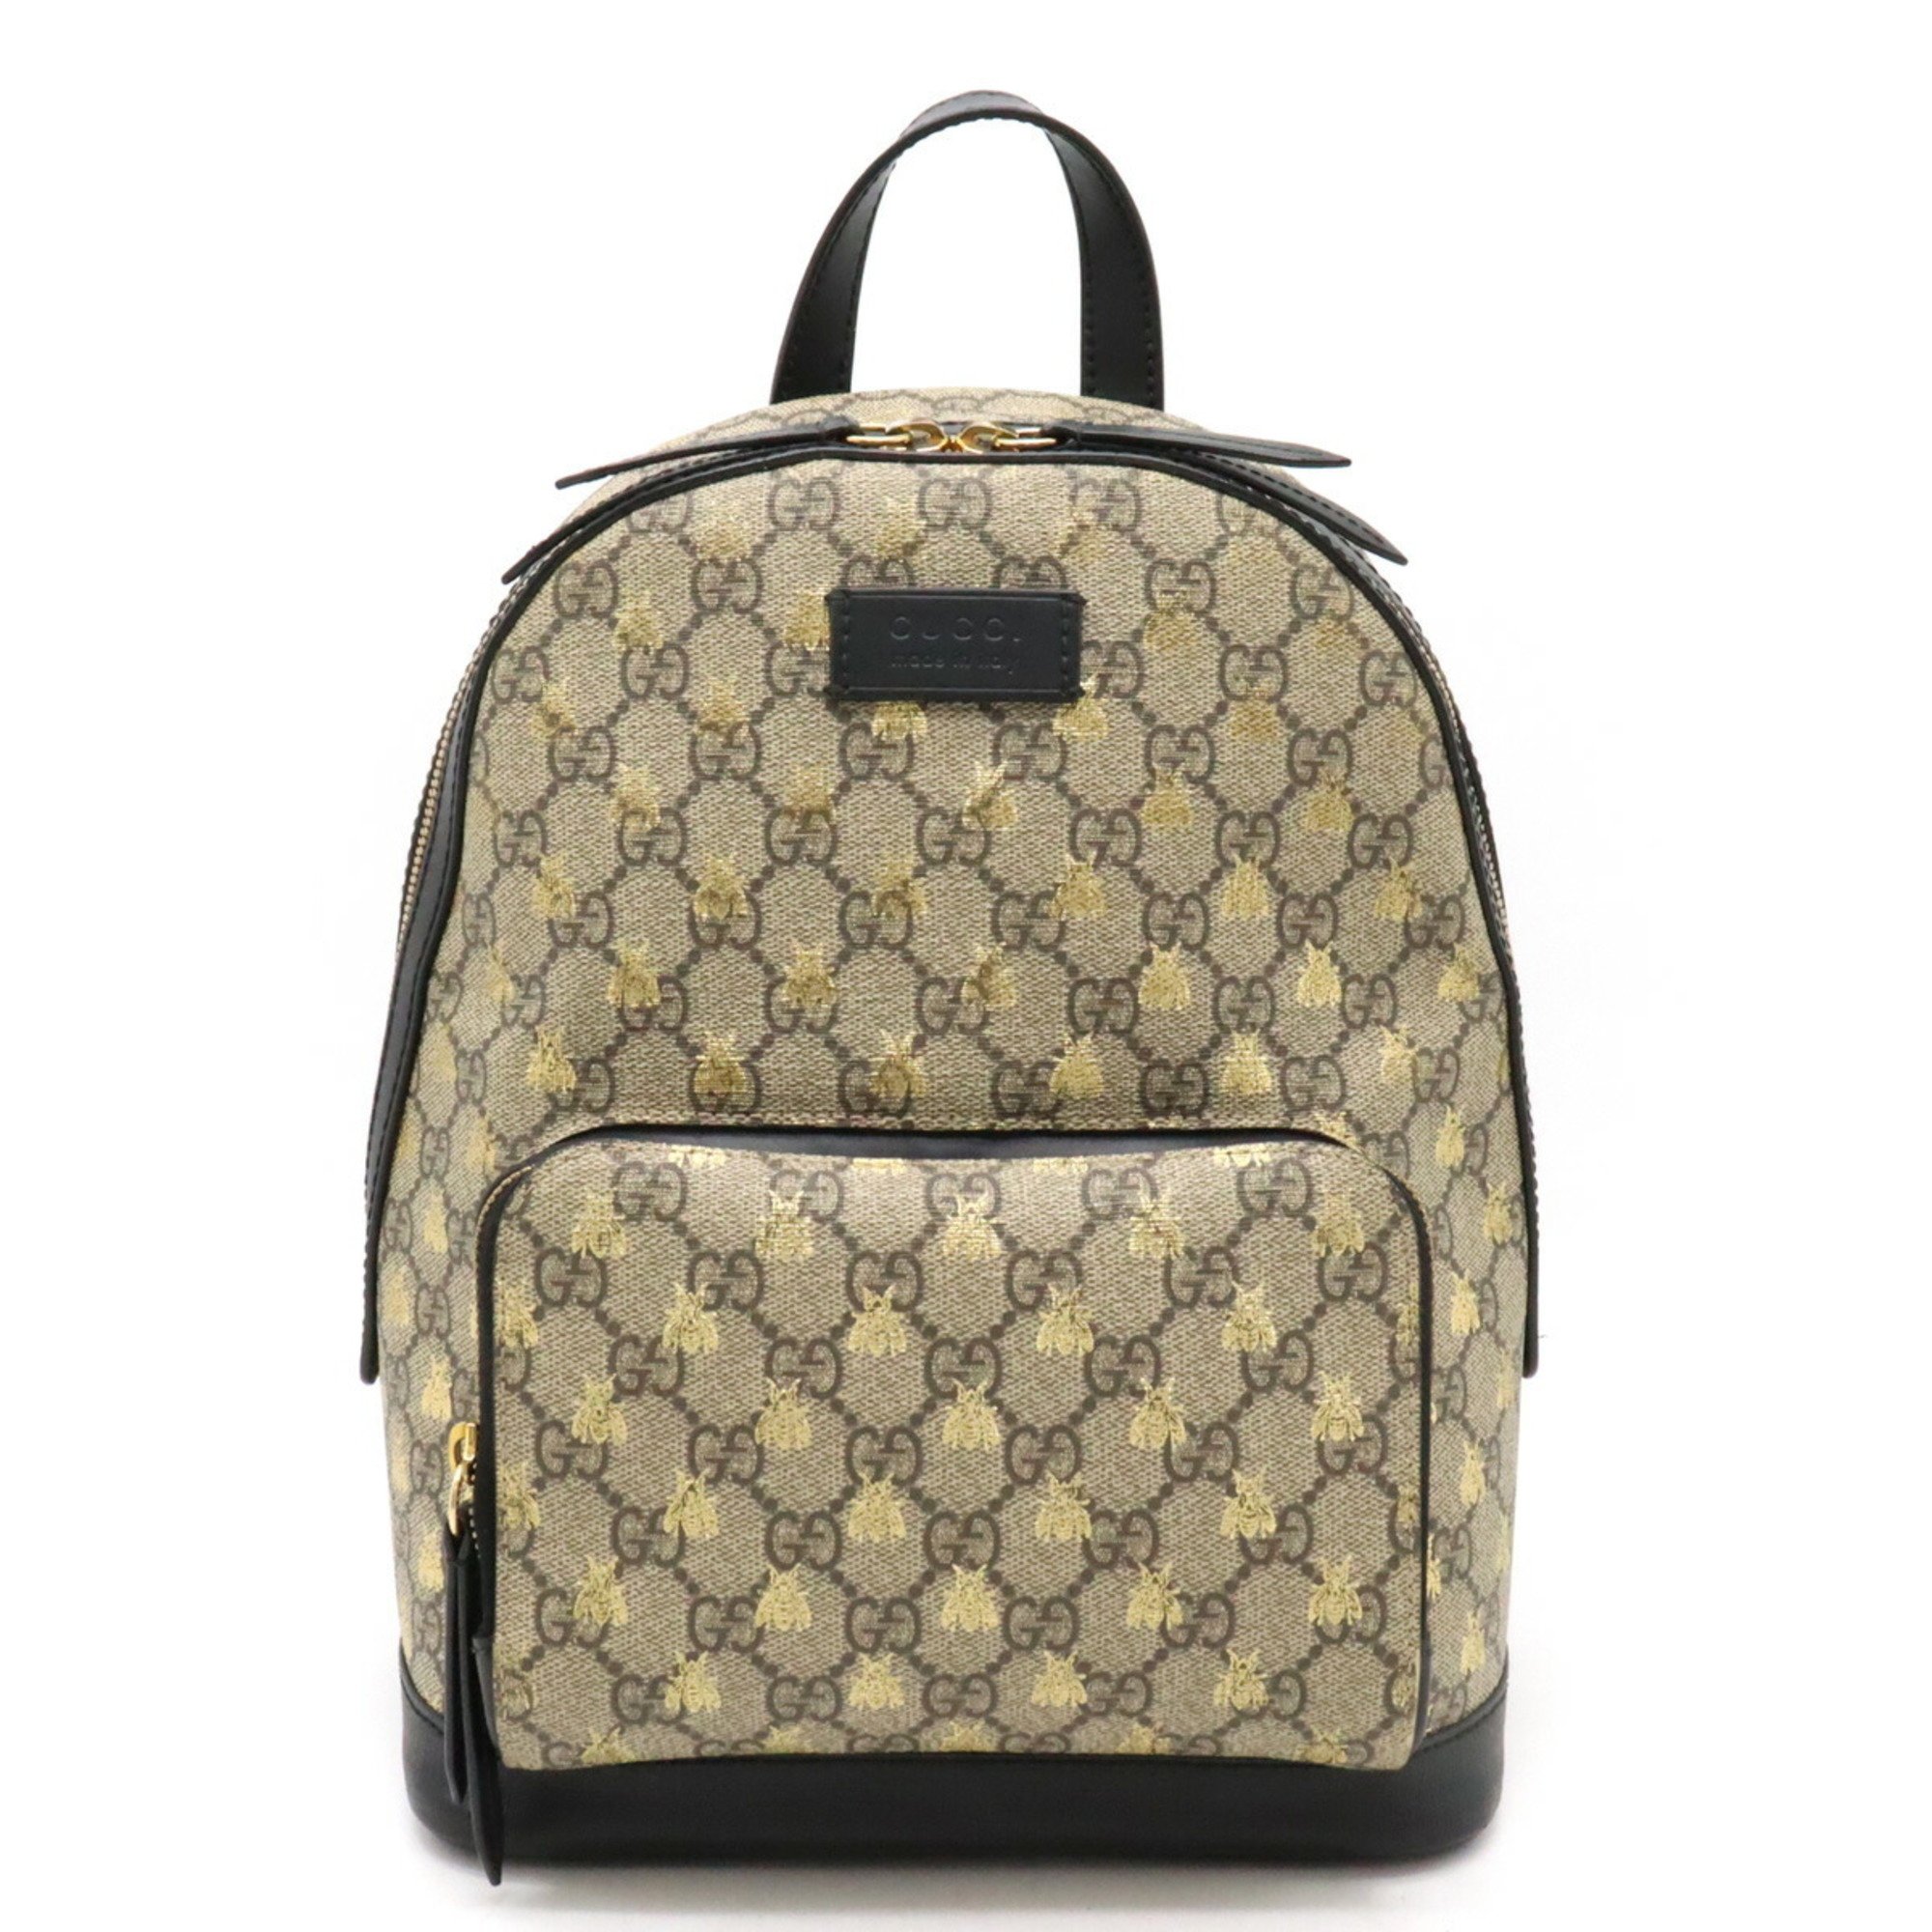 GUCCI GG Supreme Bee Backpack PVC Leather Beige Black Gold 427042